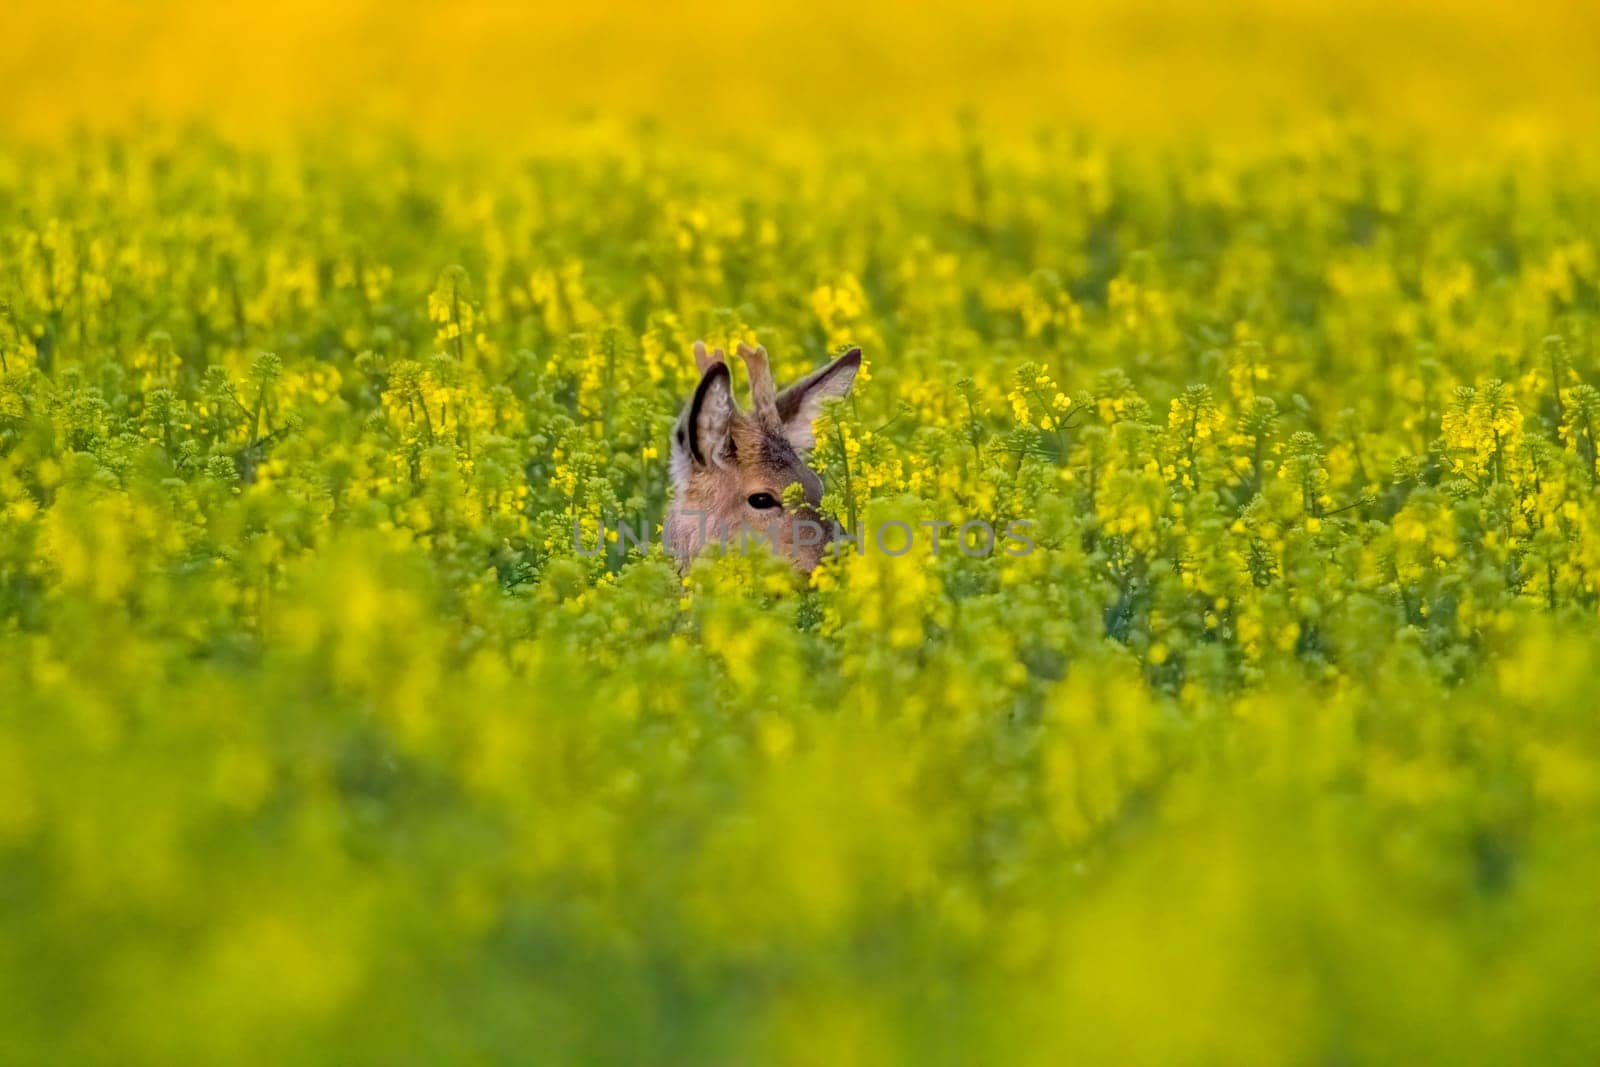 a young roebuck looks out of a rape field in summer